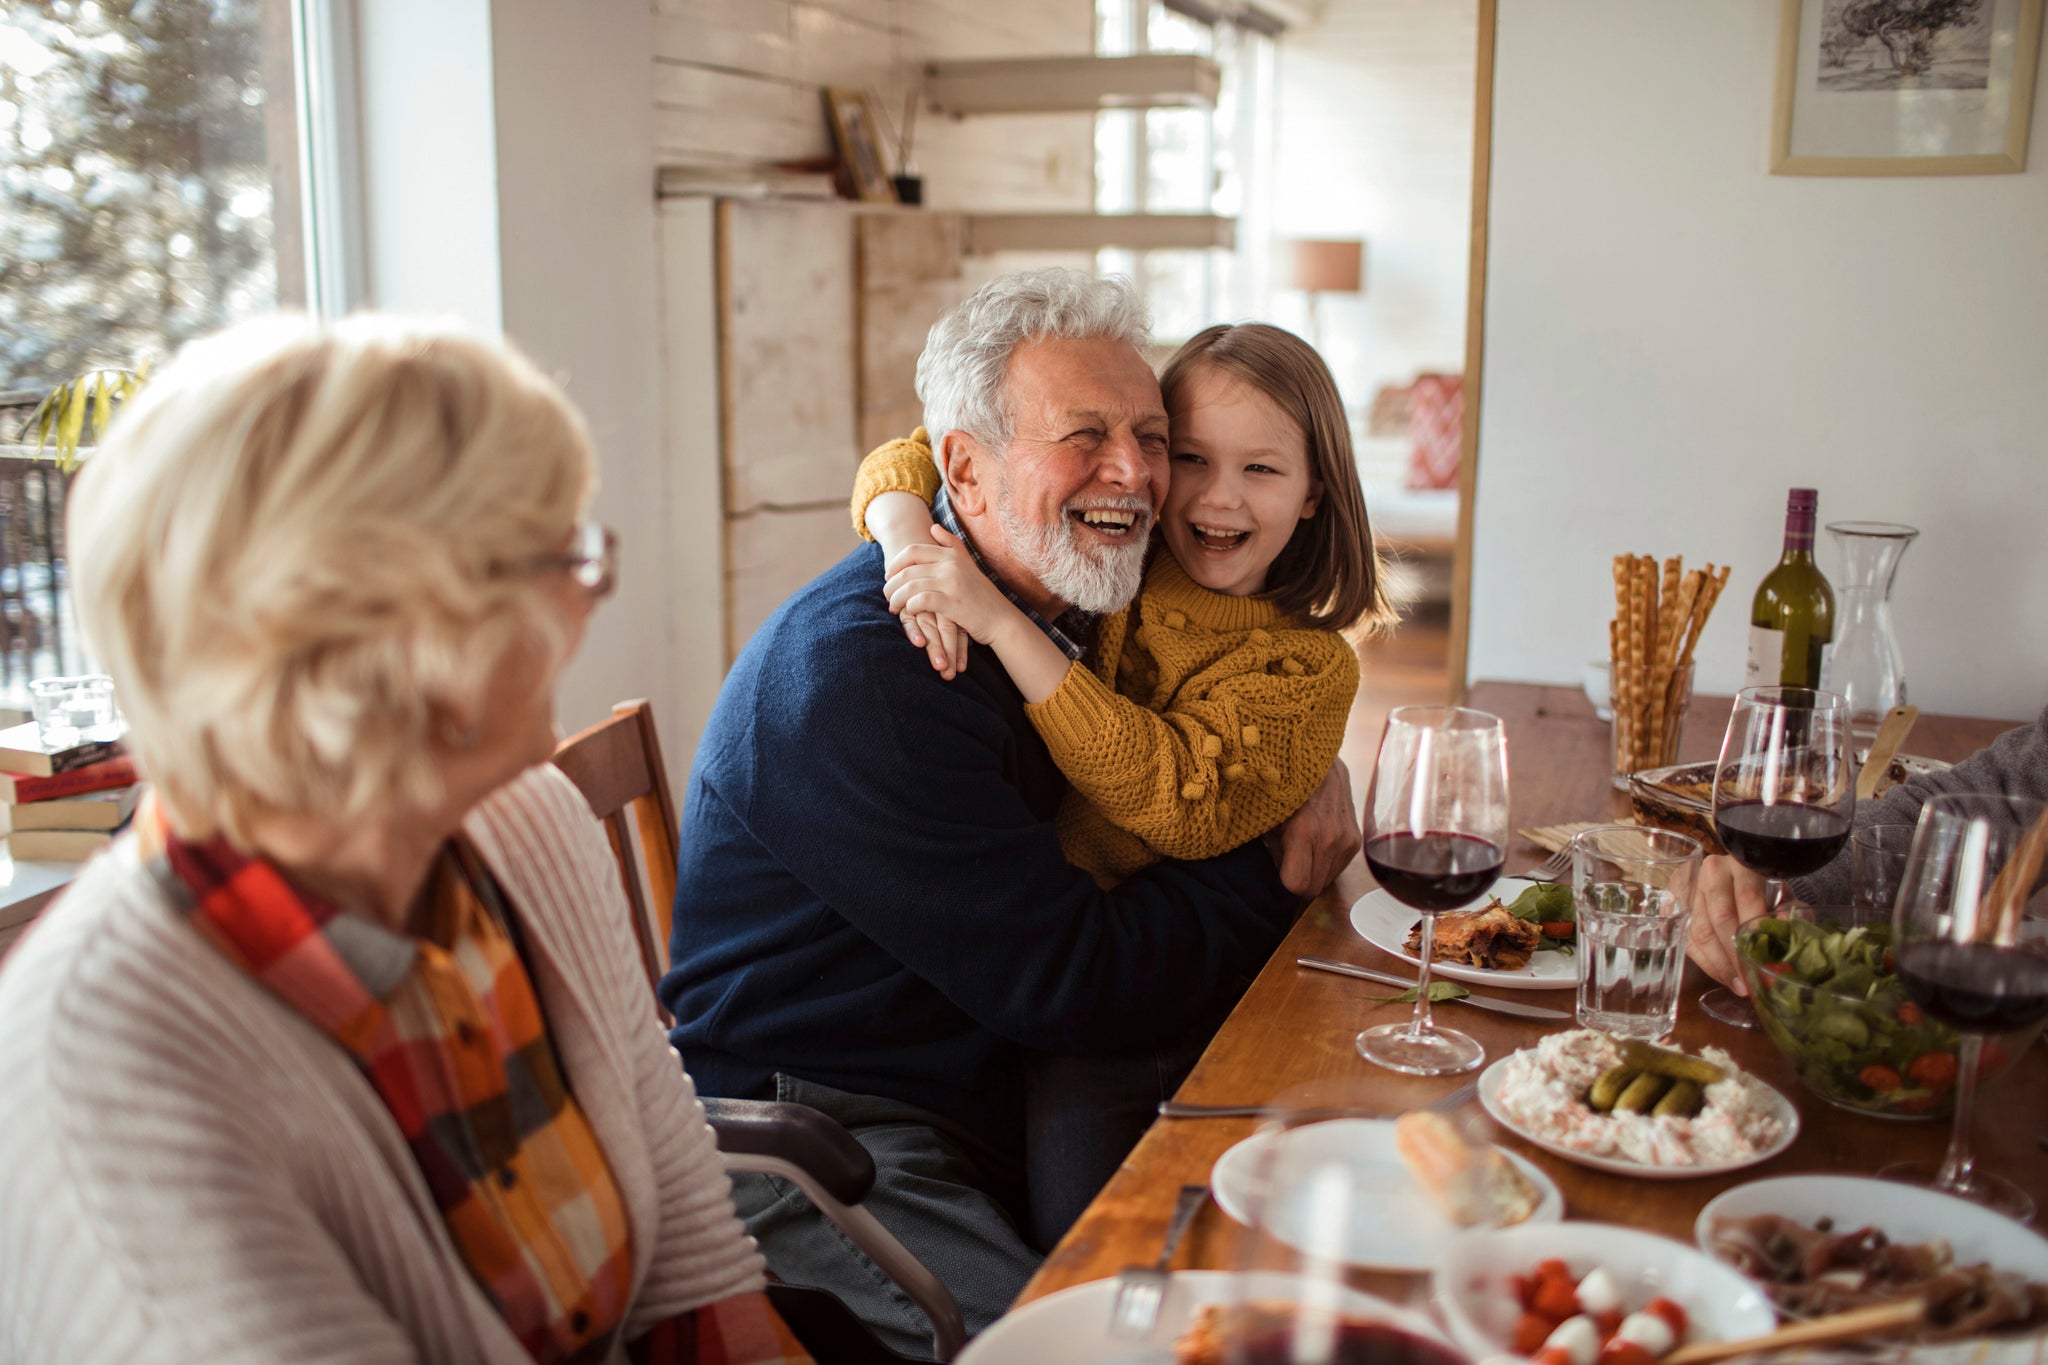 As much as parents play a vital role in the lives of children, so do grandparents.